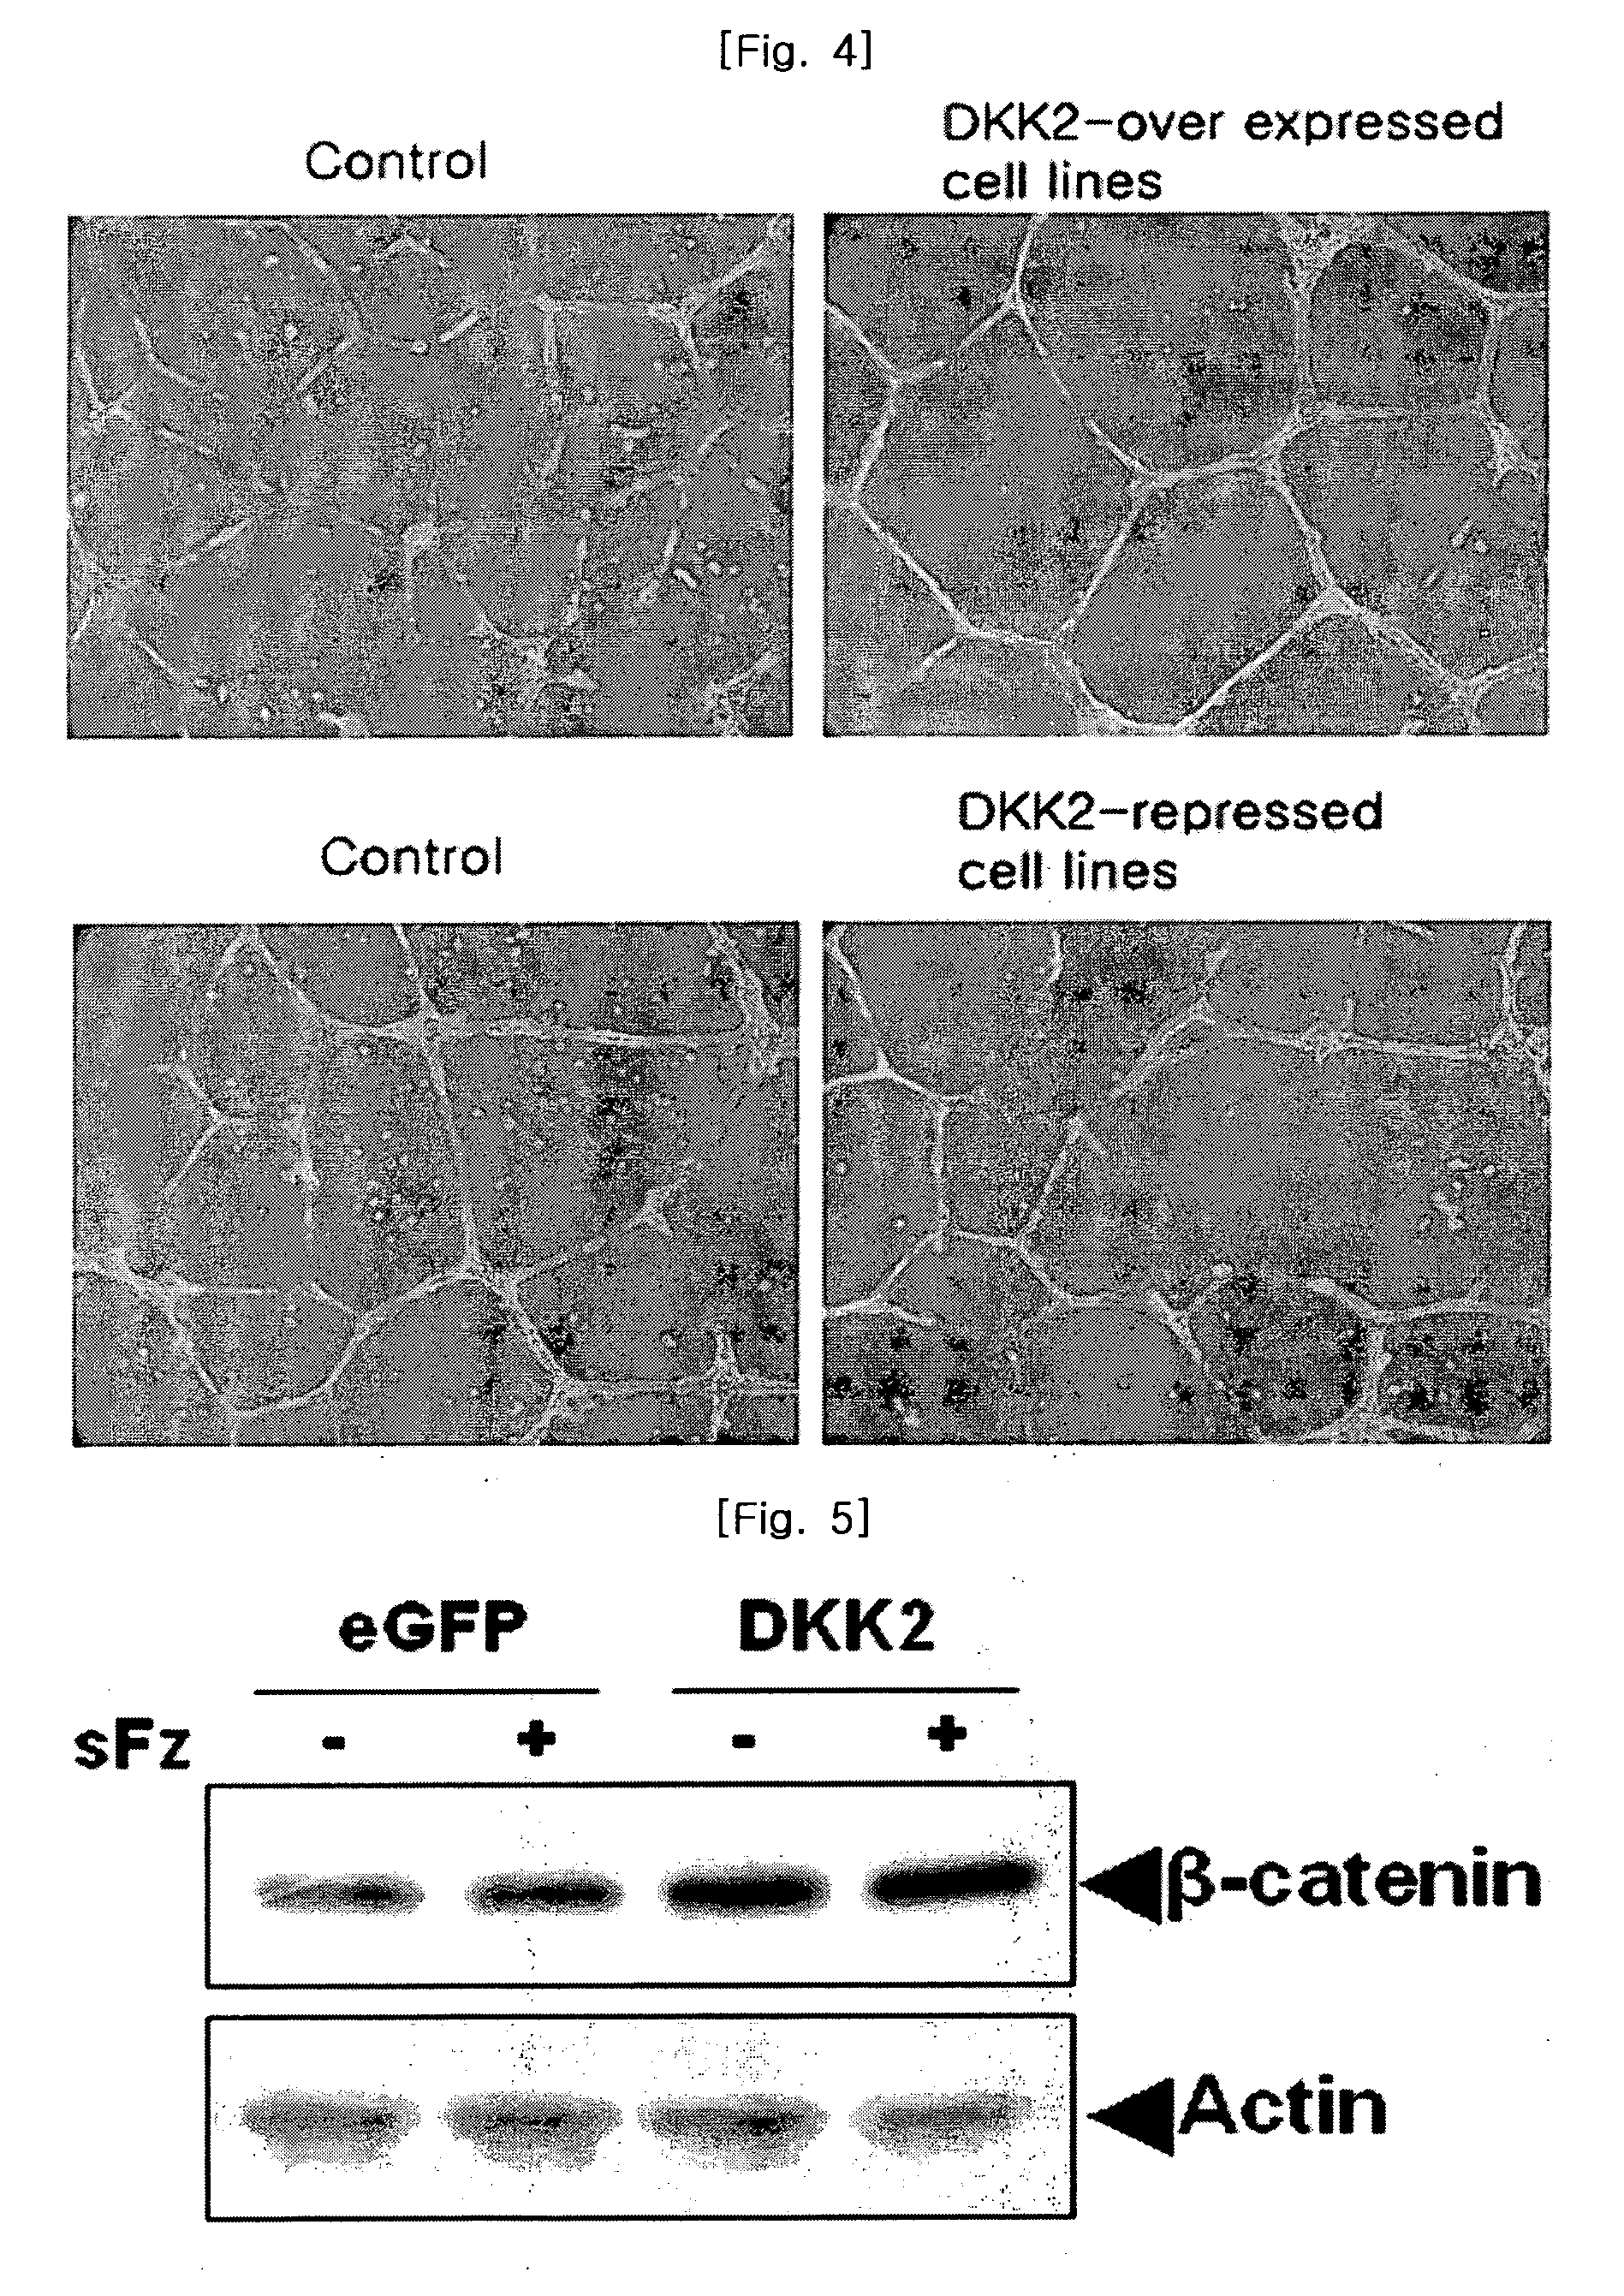 Method for stimulating angiogenesis using dkk2 and composition comprising the same